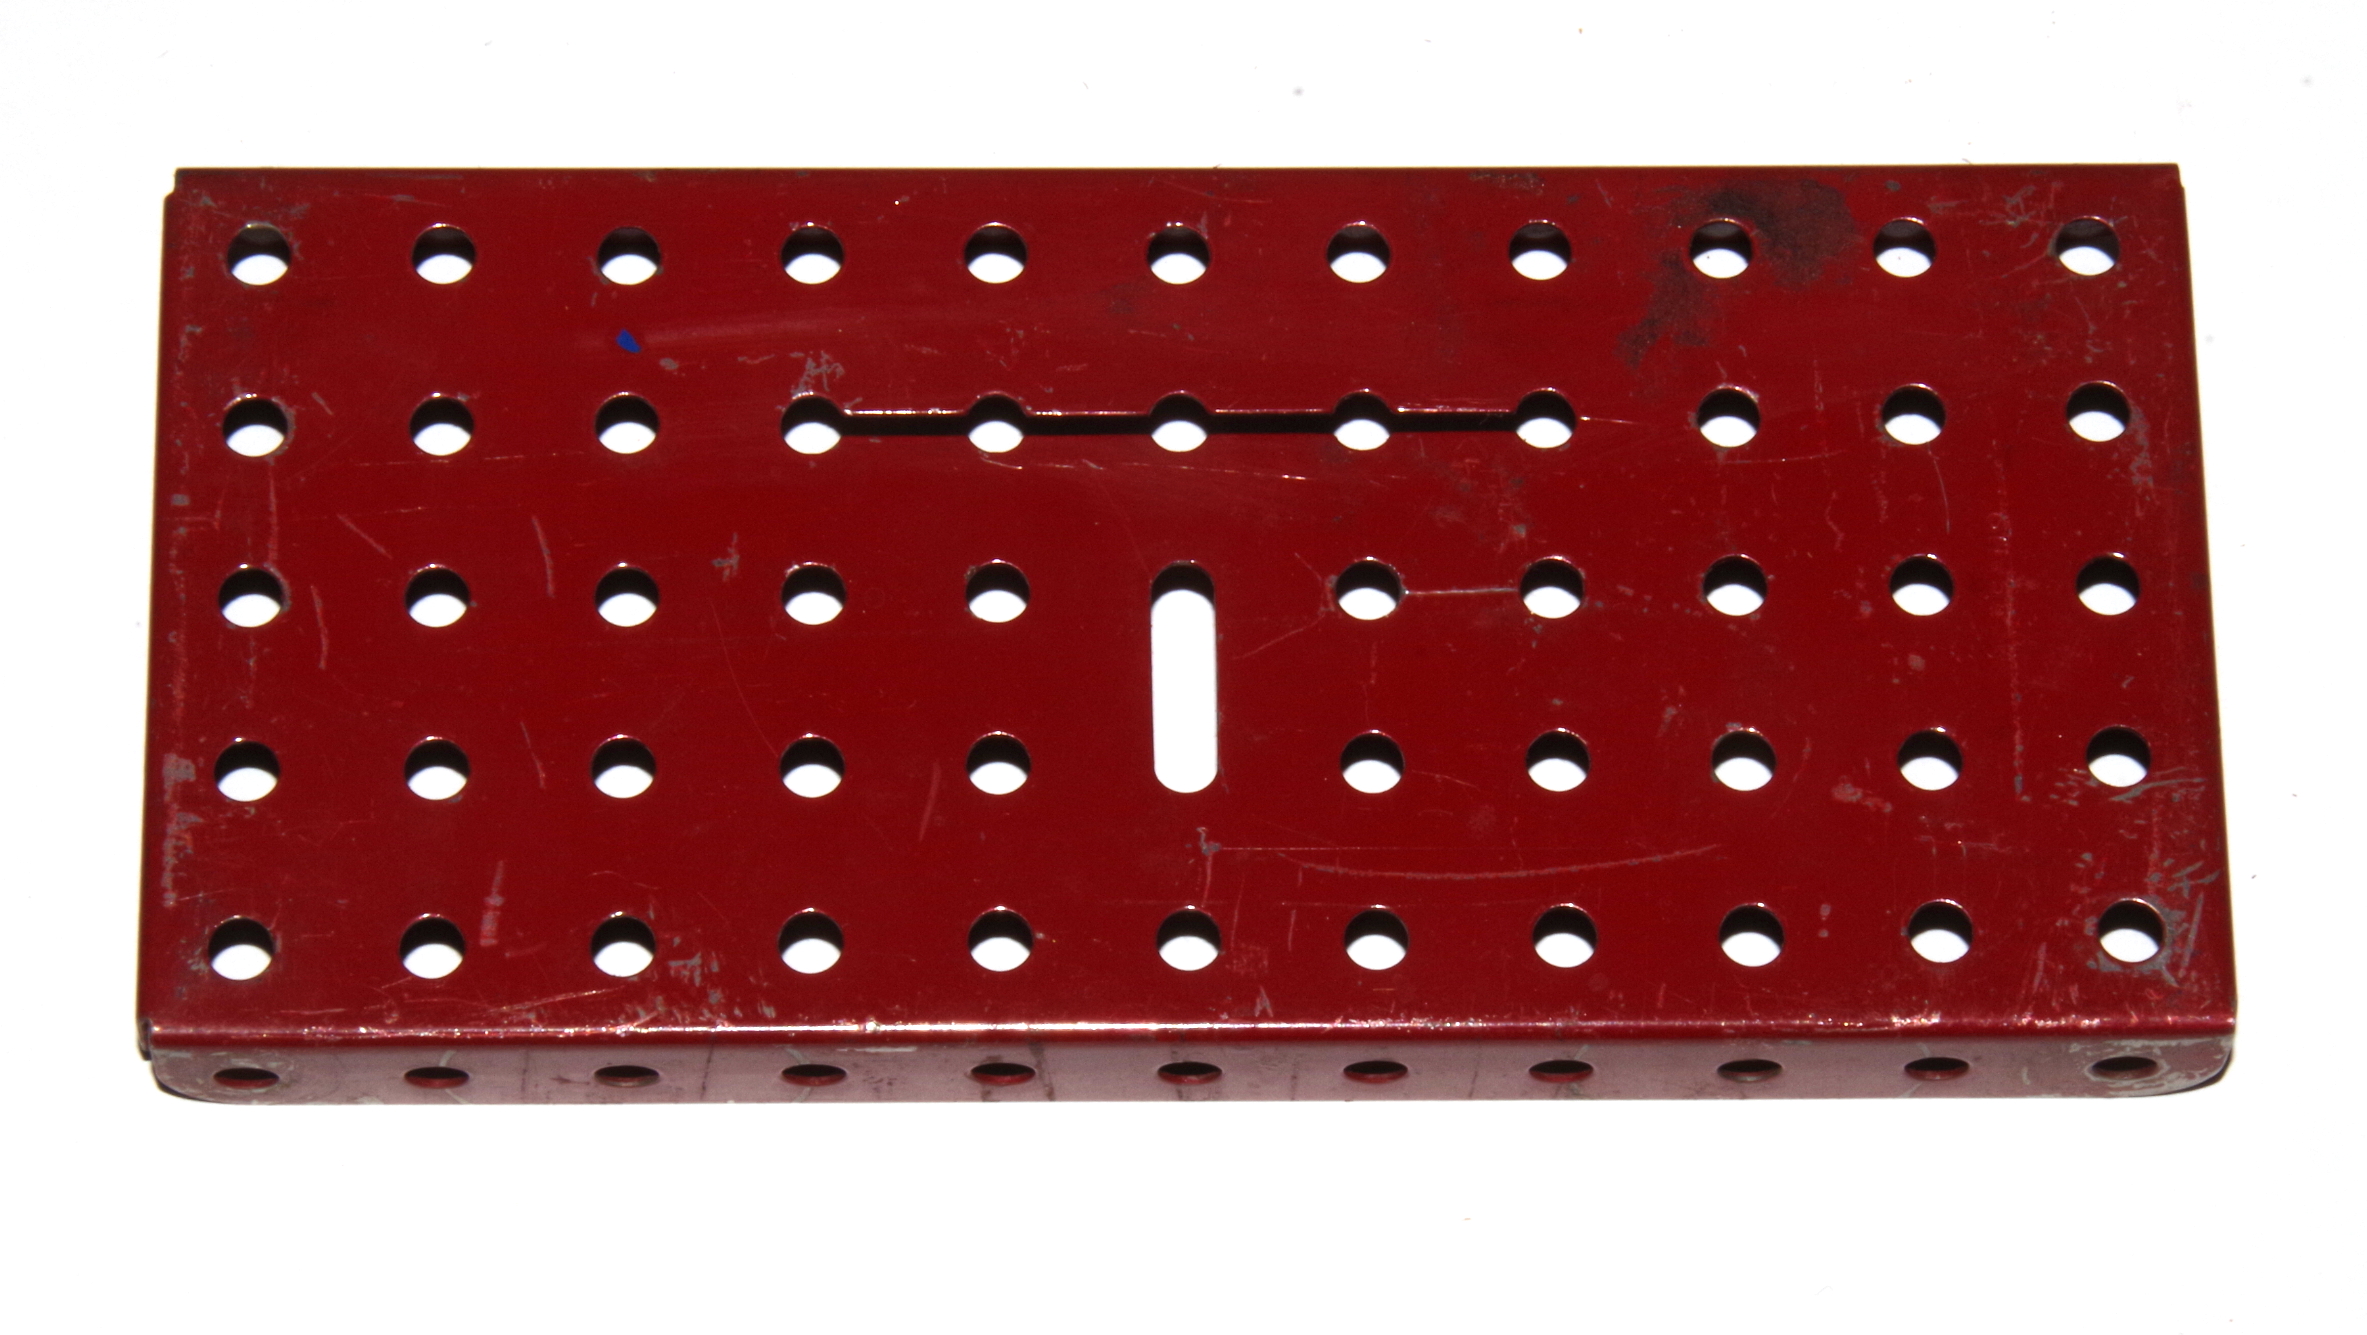 52x Flanged Plate 11x5 Hole Dark Red Slotted Original